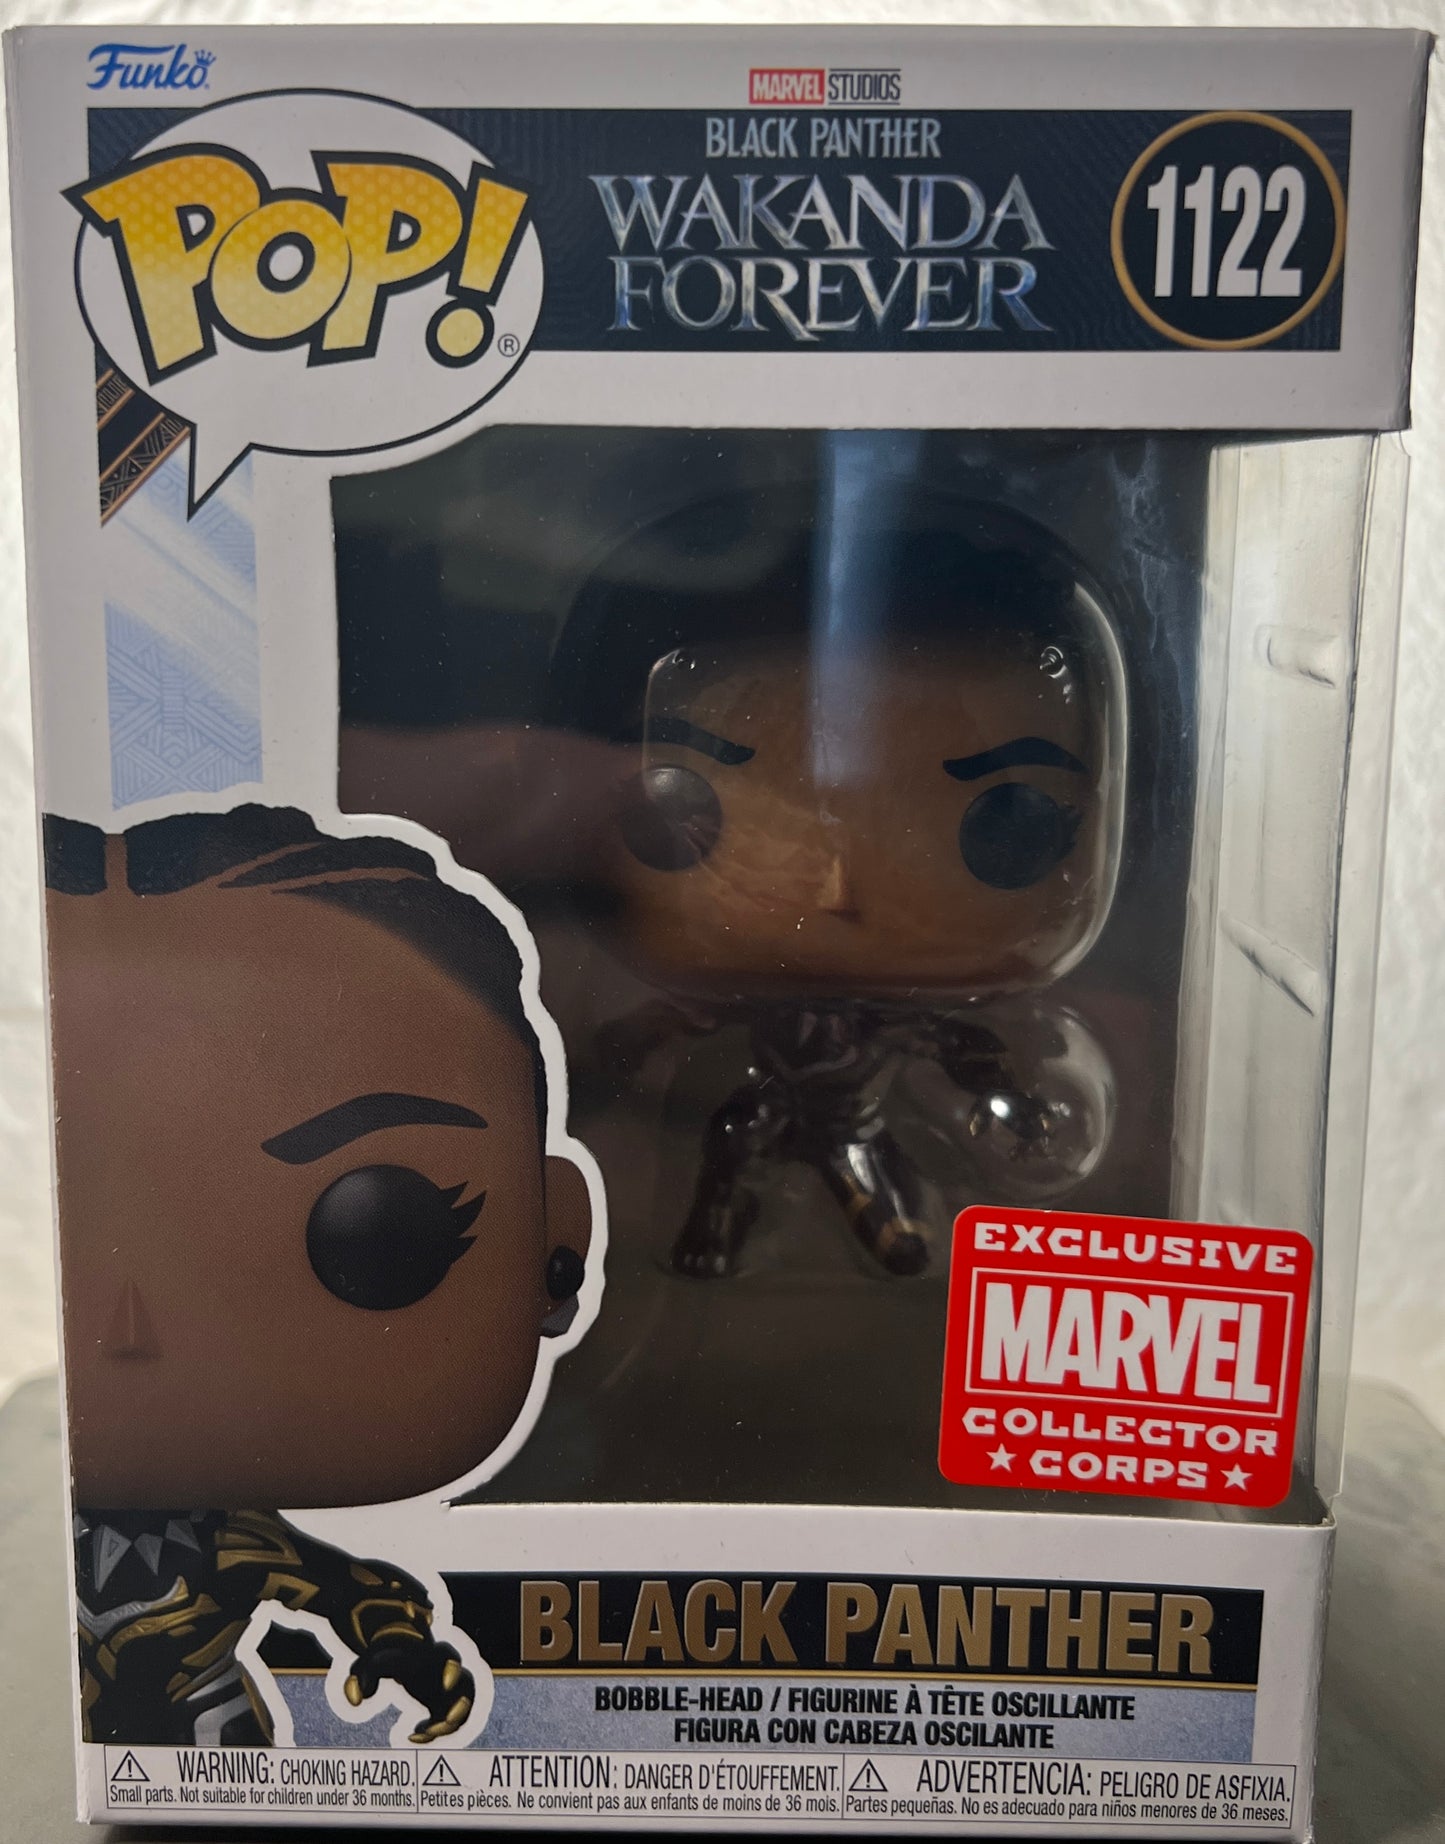 Black Panther and Ayo Wakanda Forever Marvel Collector Corp Exclusive